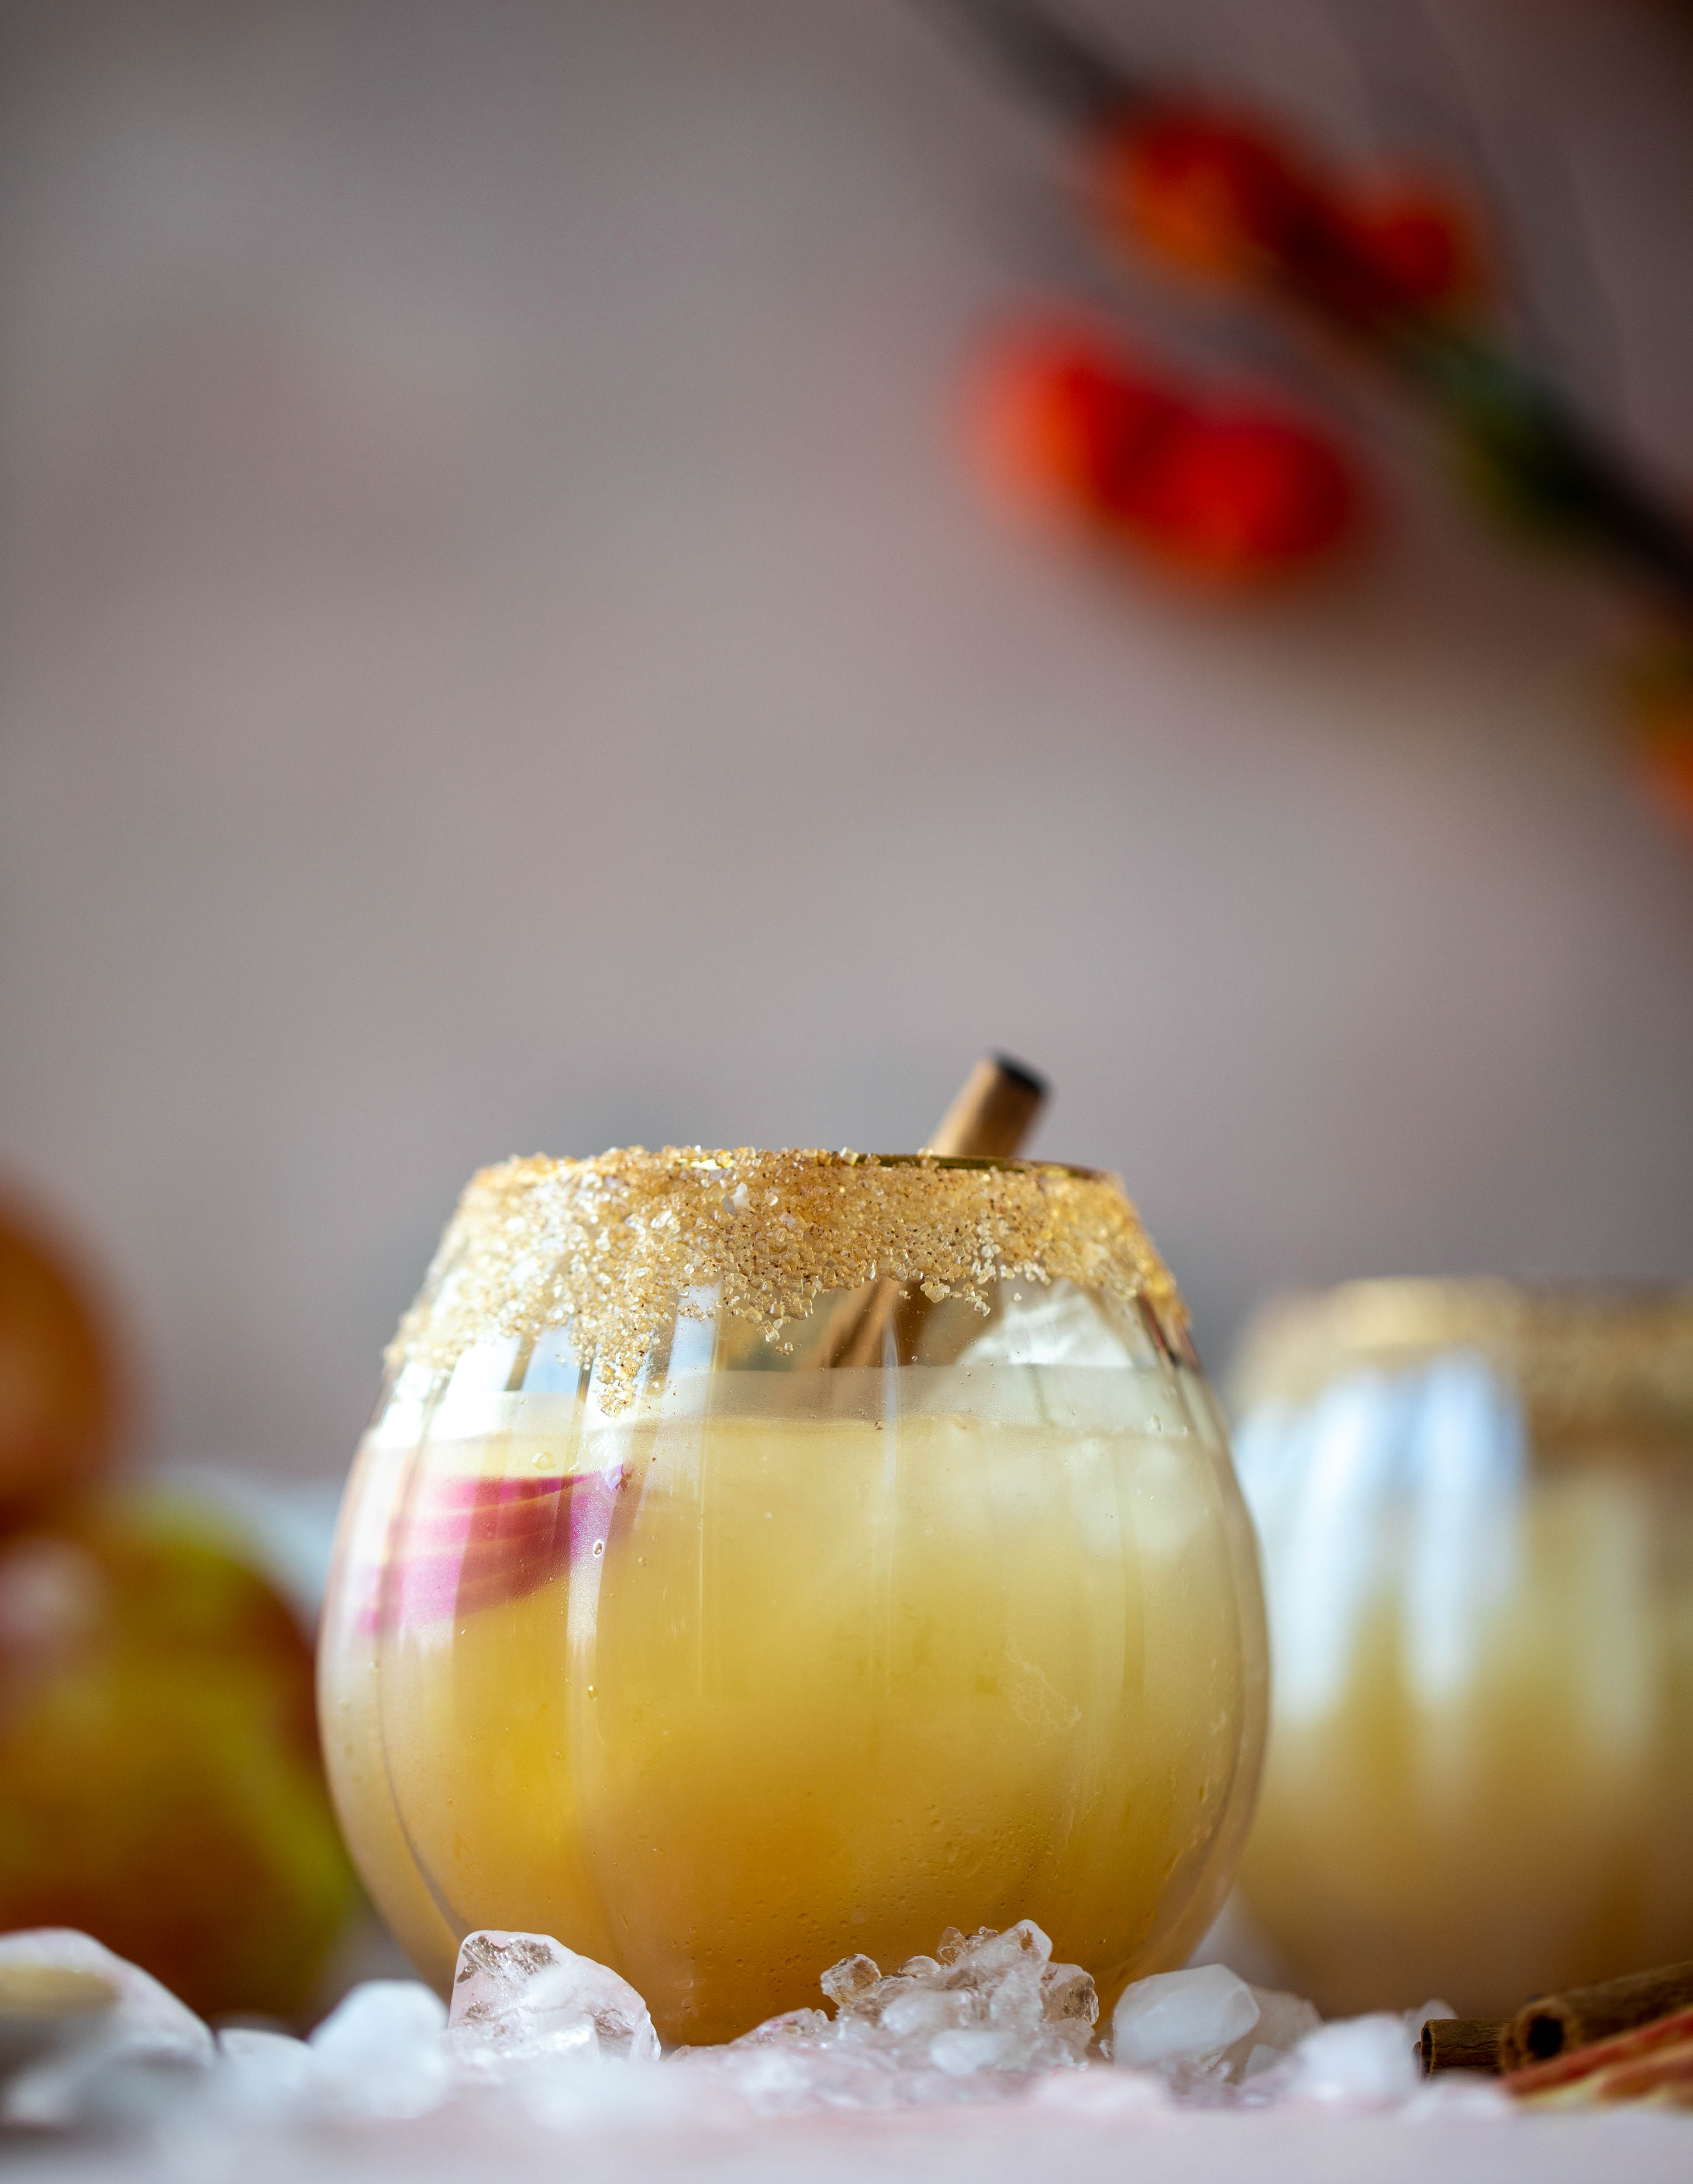 This apple cider mezcal margarita is a delicious, smoky cocktail for fall! It's warming and refreshing and delicious all at once. Cheers!